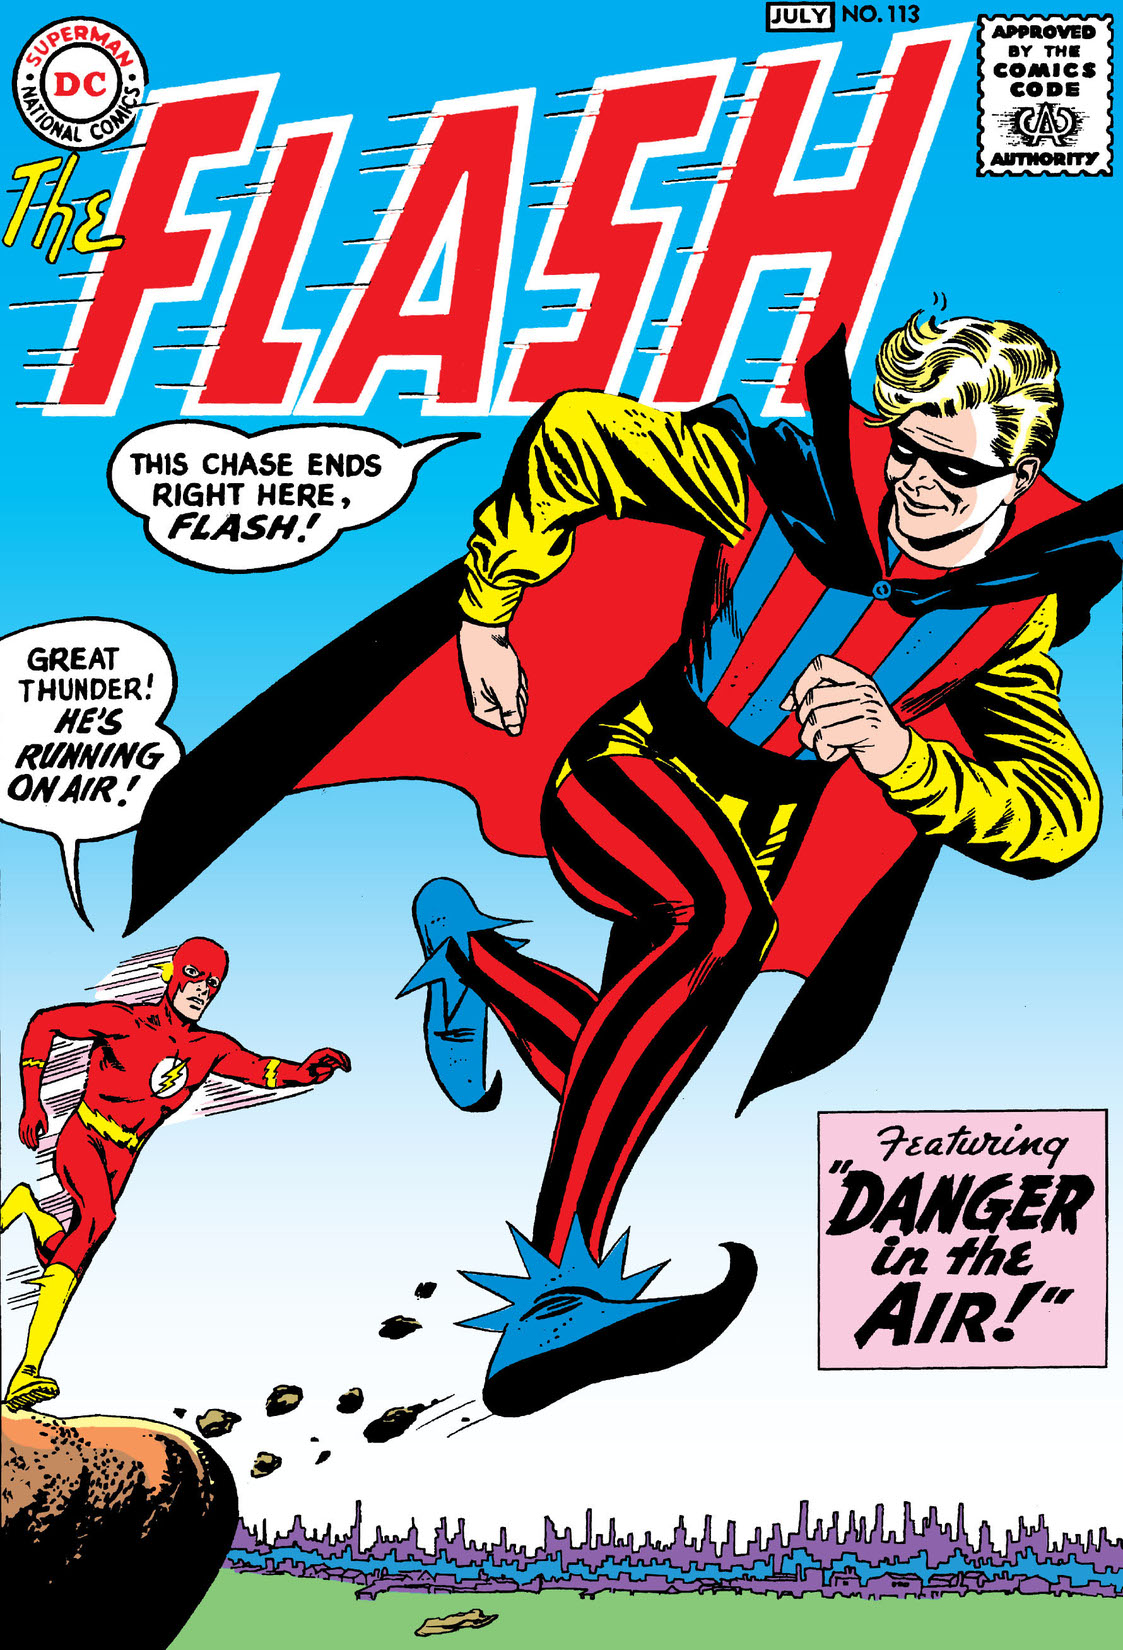 The Flash (1959-) #113 preview images